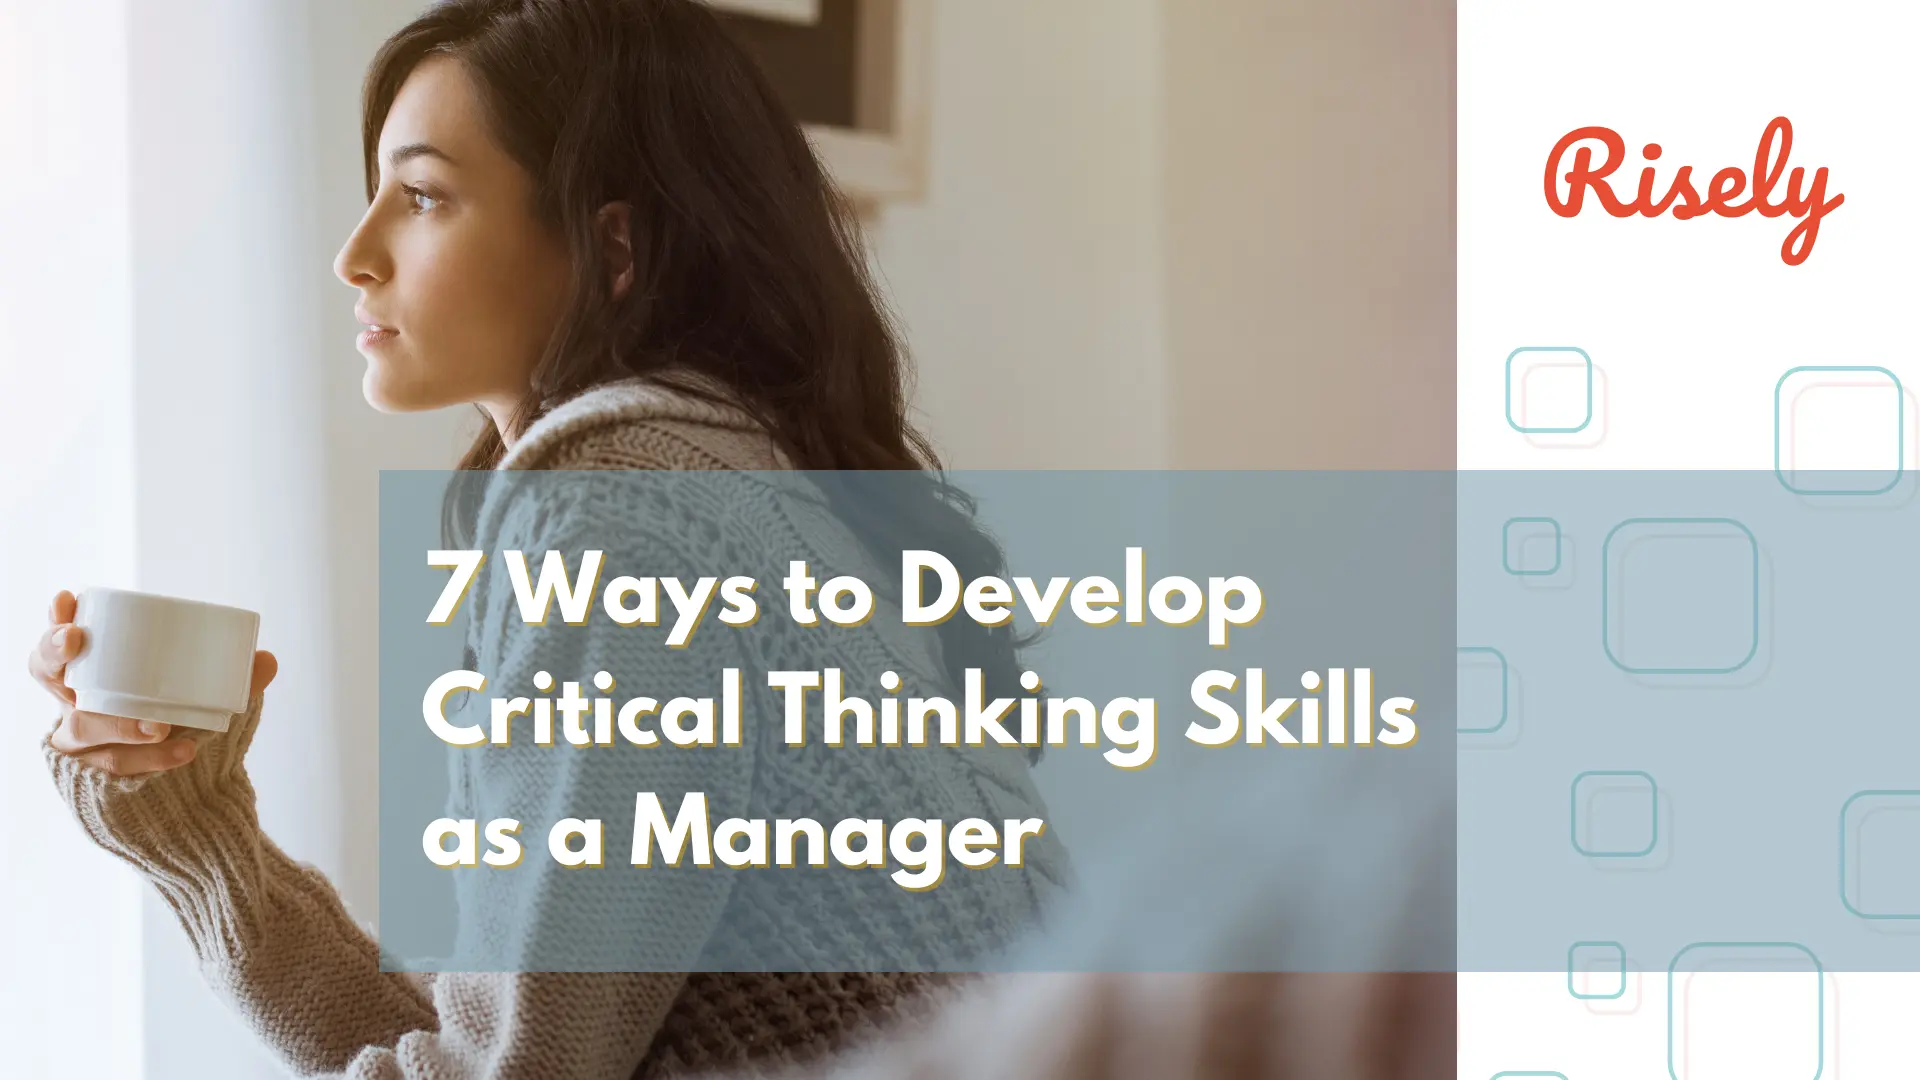 7 Ways to Develop Critical Thinking Skills as a Manager